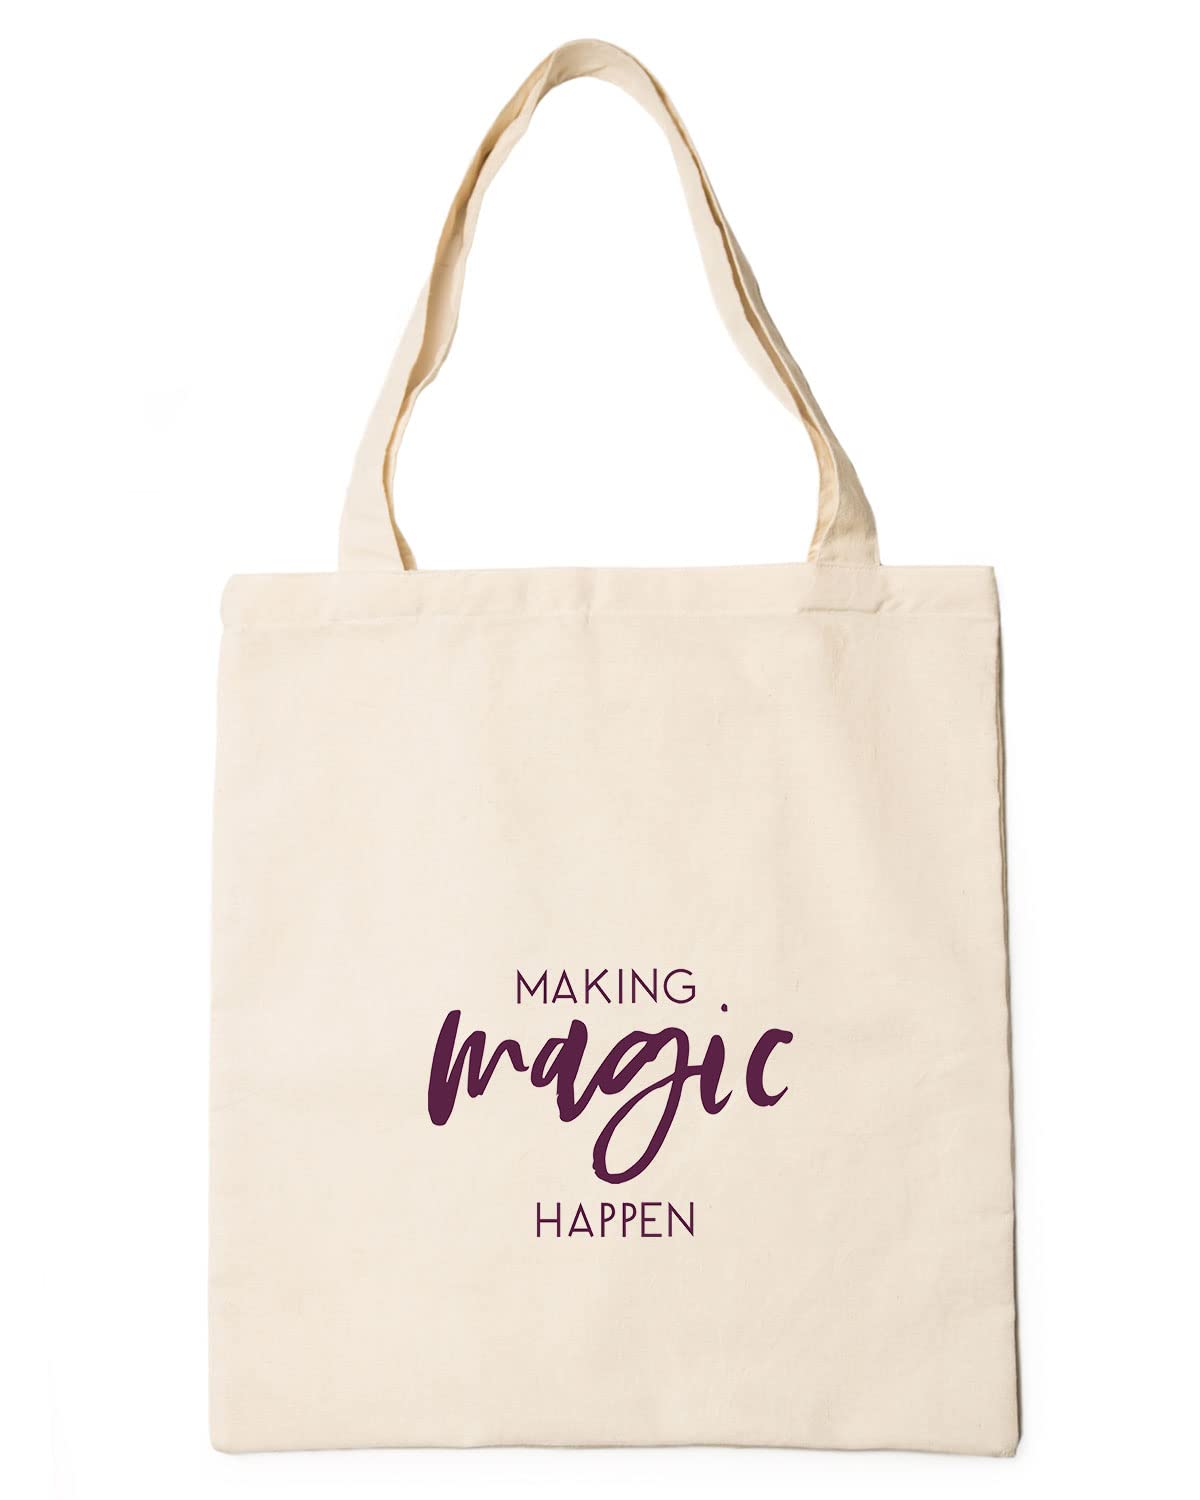 The Pink Magnet Making Magic Happen Tote Bag - Canvas Tote Bag for Women | Printed Multipurpose Cotton Bags | Cute Hand Bag for Girls | Best for College, Travel, Grocery | Reusable Shopping Bag | Eco-Friendly Tote Bag